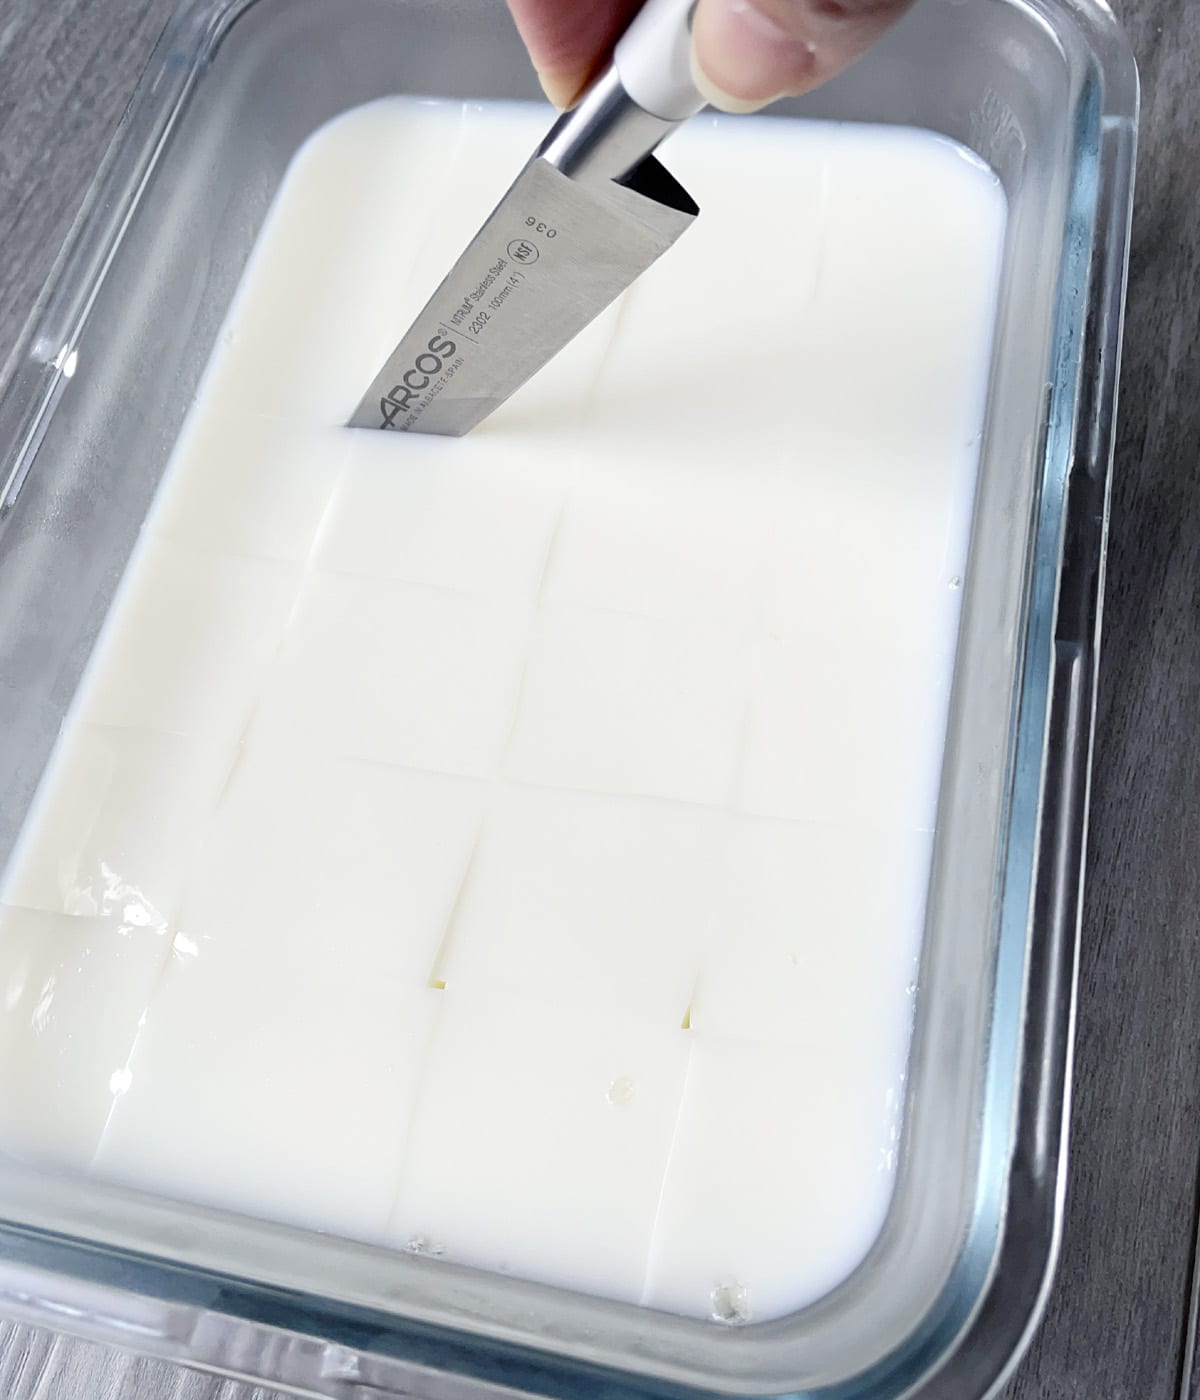 A knife cutting cubes from a glass container of white jelly.